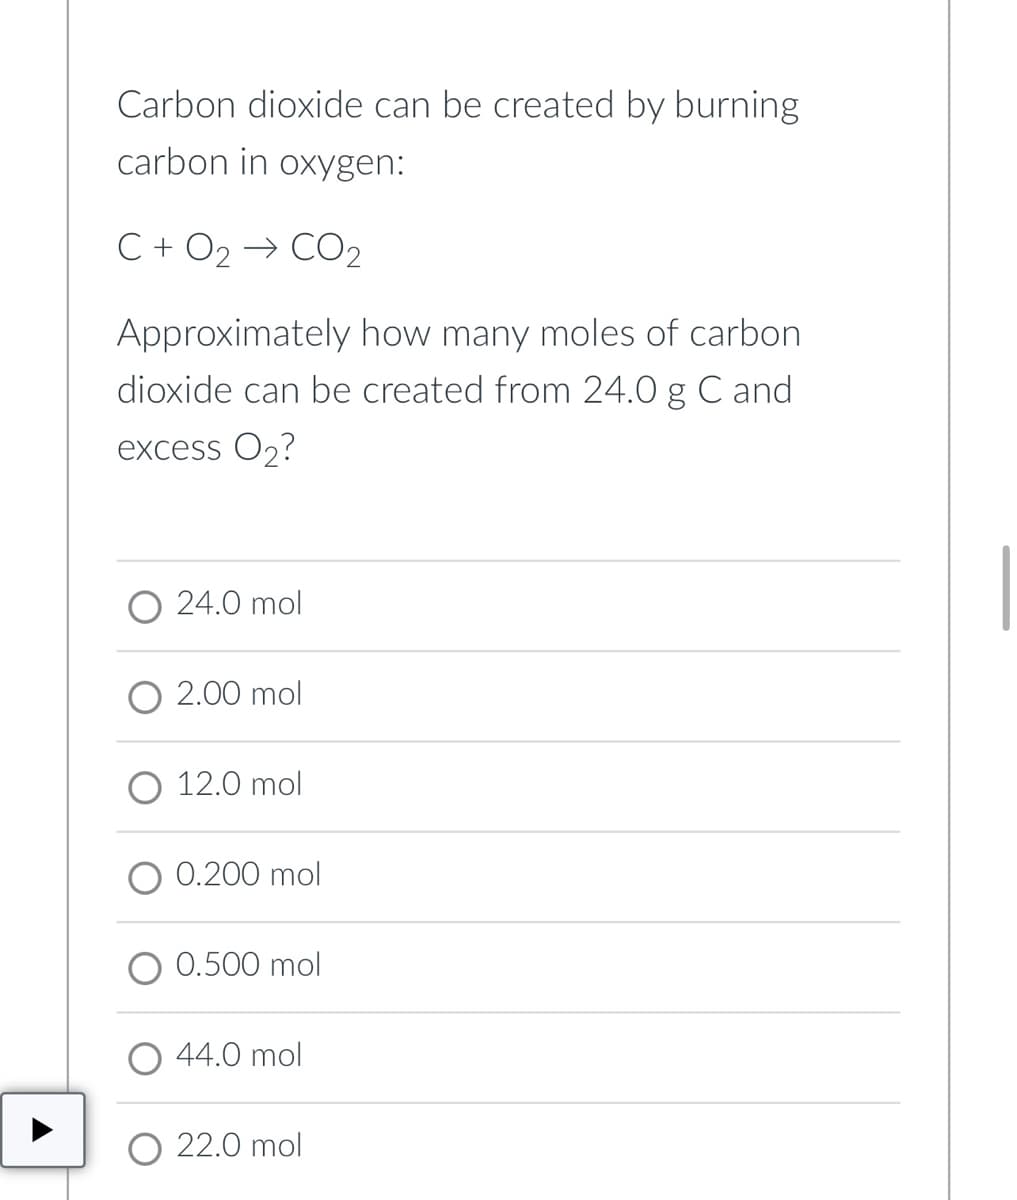 Carbon dioxide can be created by burning
carbon in oxygen:
C + O2 → CO2
Approximately how many moles of carbon
dioxide can be created from 24.0 g C and
excess O2?
O 24.0 mol
O 2.00 mol
12.0 mol
0.200 mol
0.500 mol
44.0 mol
O 22.0 mol
